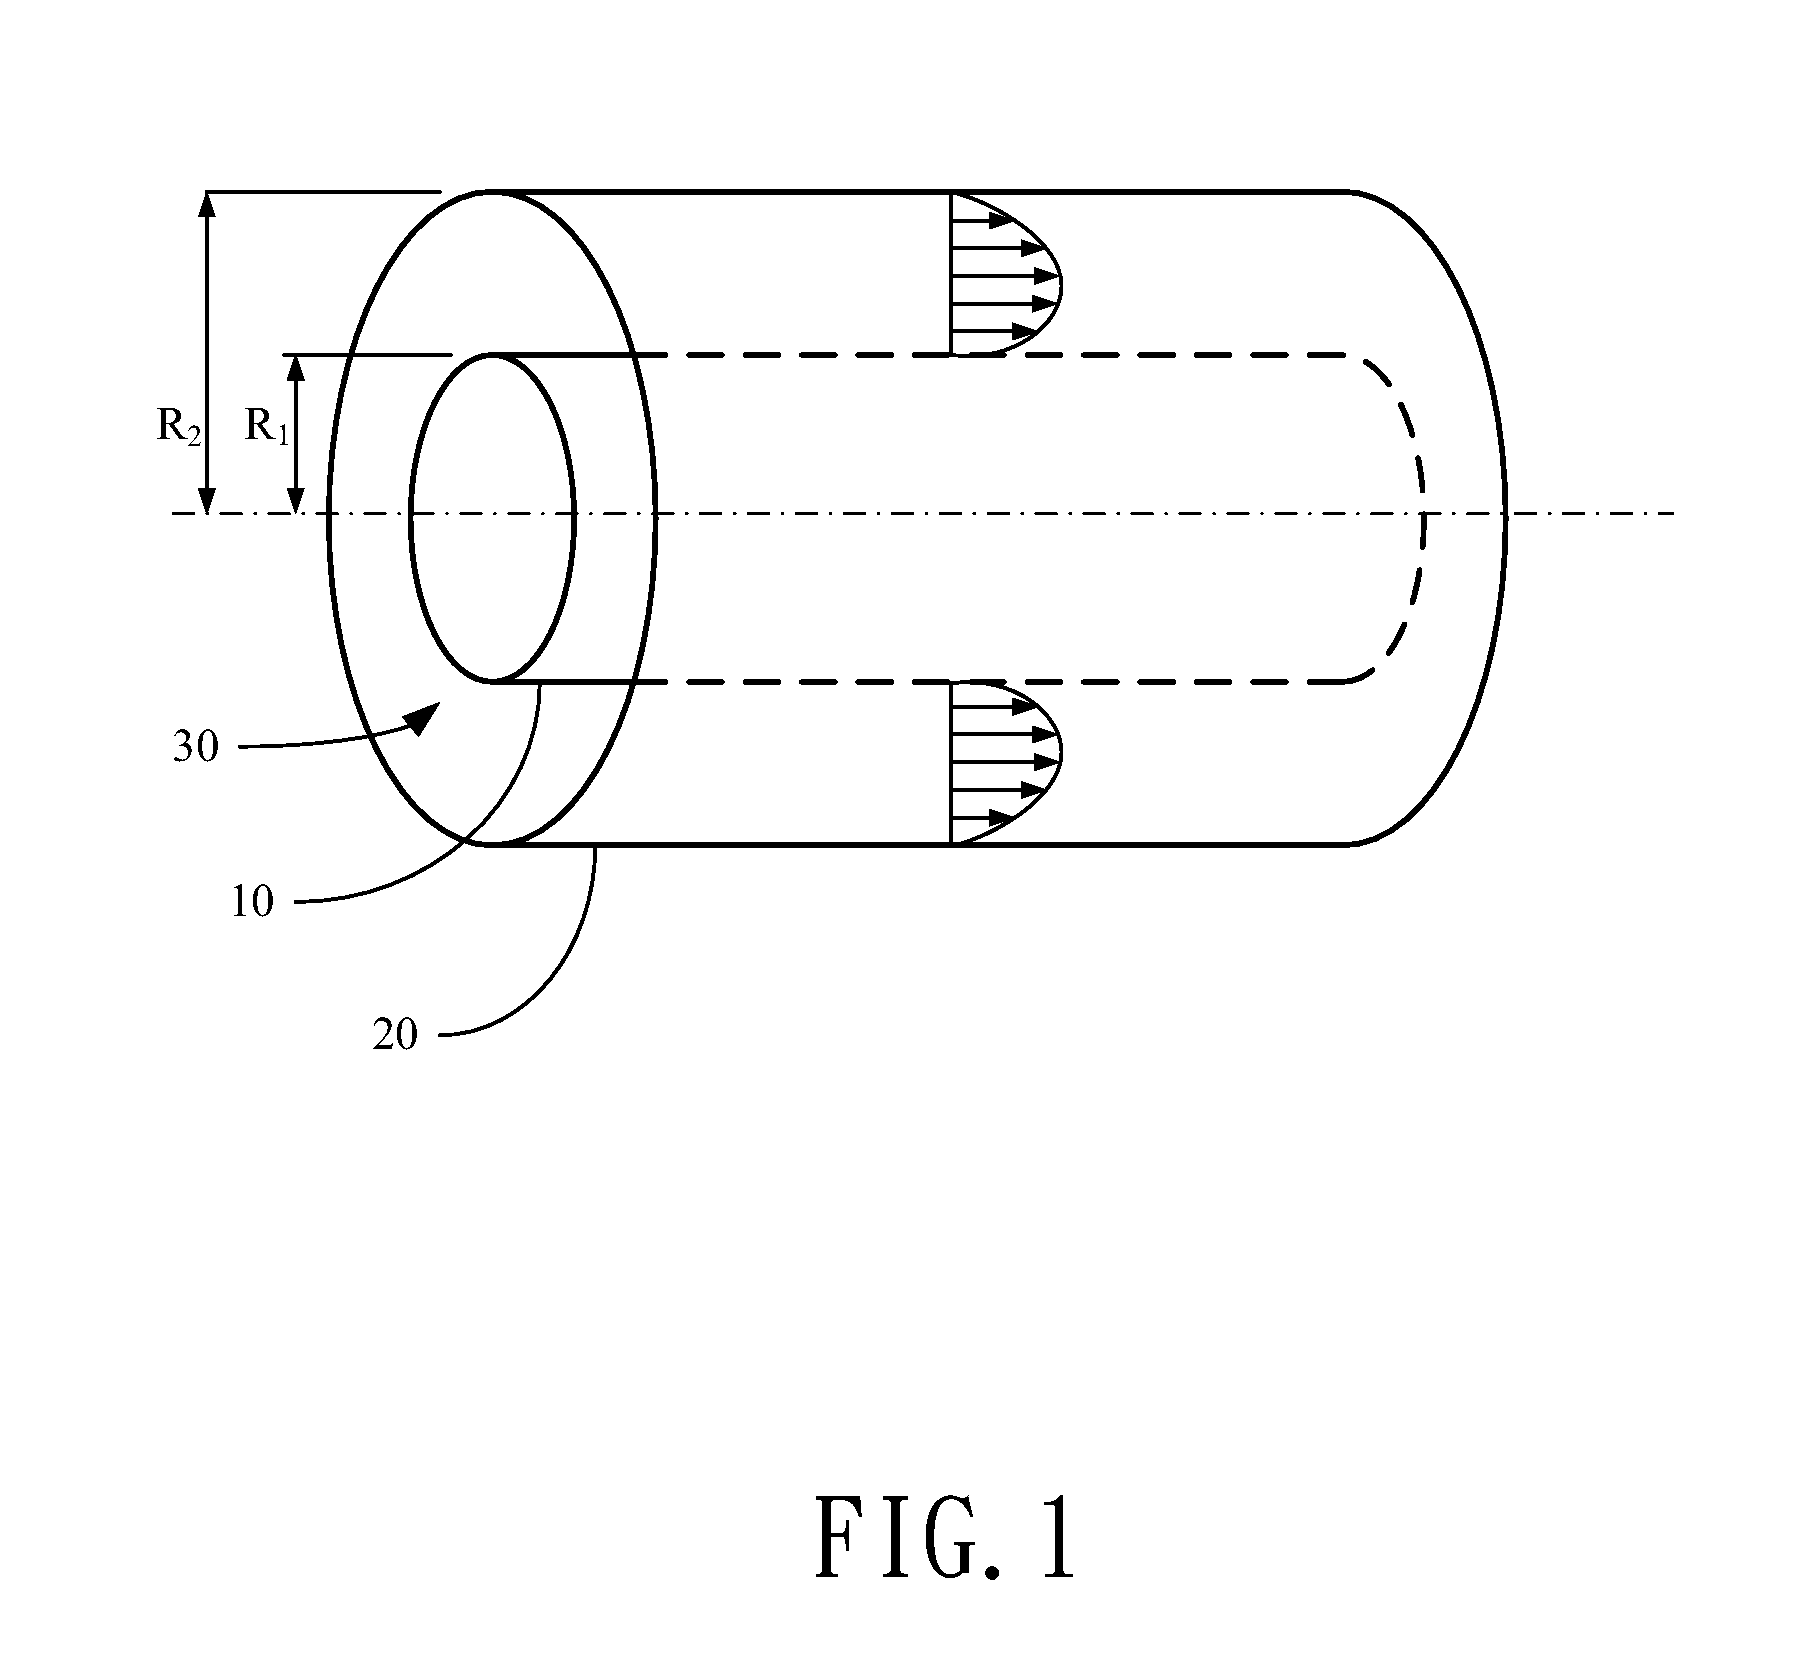 Method and System for Measuring the Zeta Potential of the Cylinder's Outer Surface